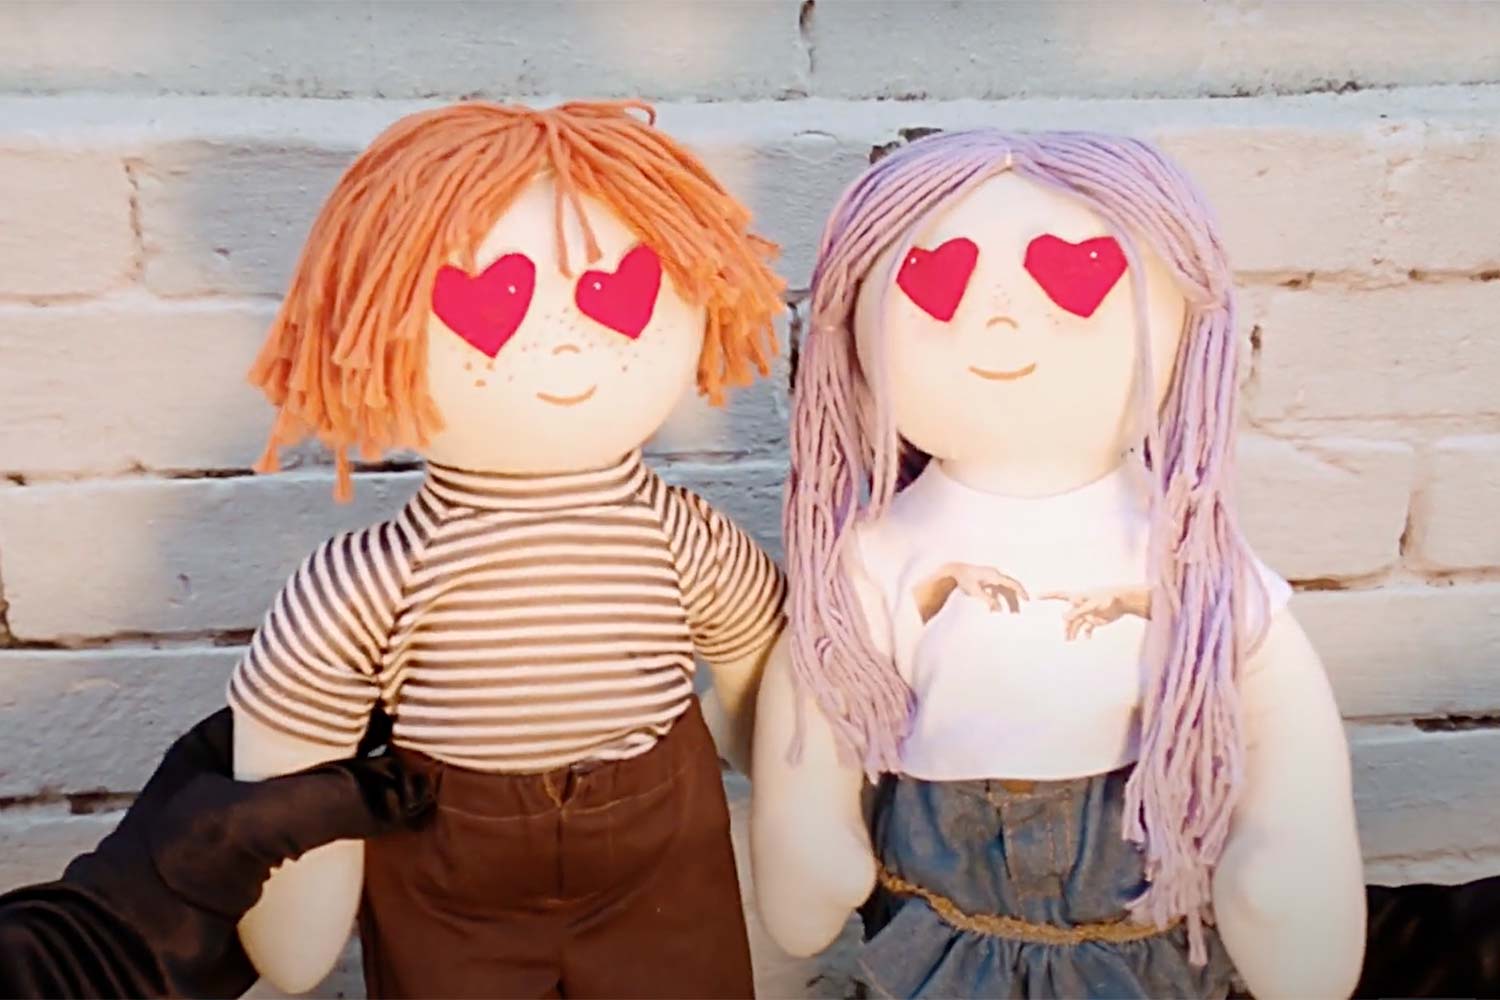 dolls from Hunter Morris and Blue Blood's Lookin' for a Friend video.